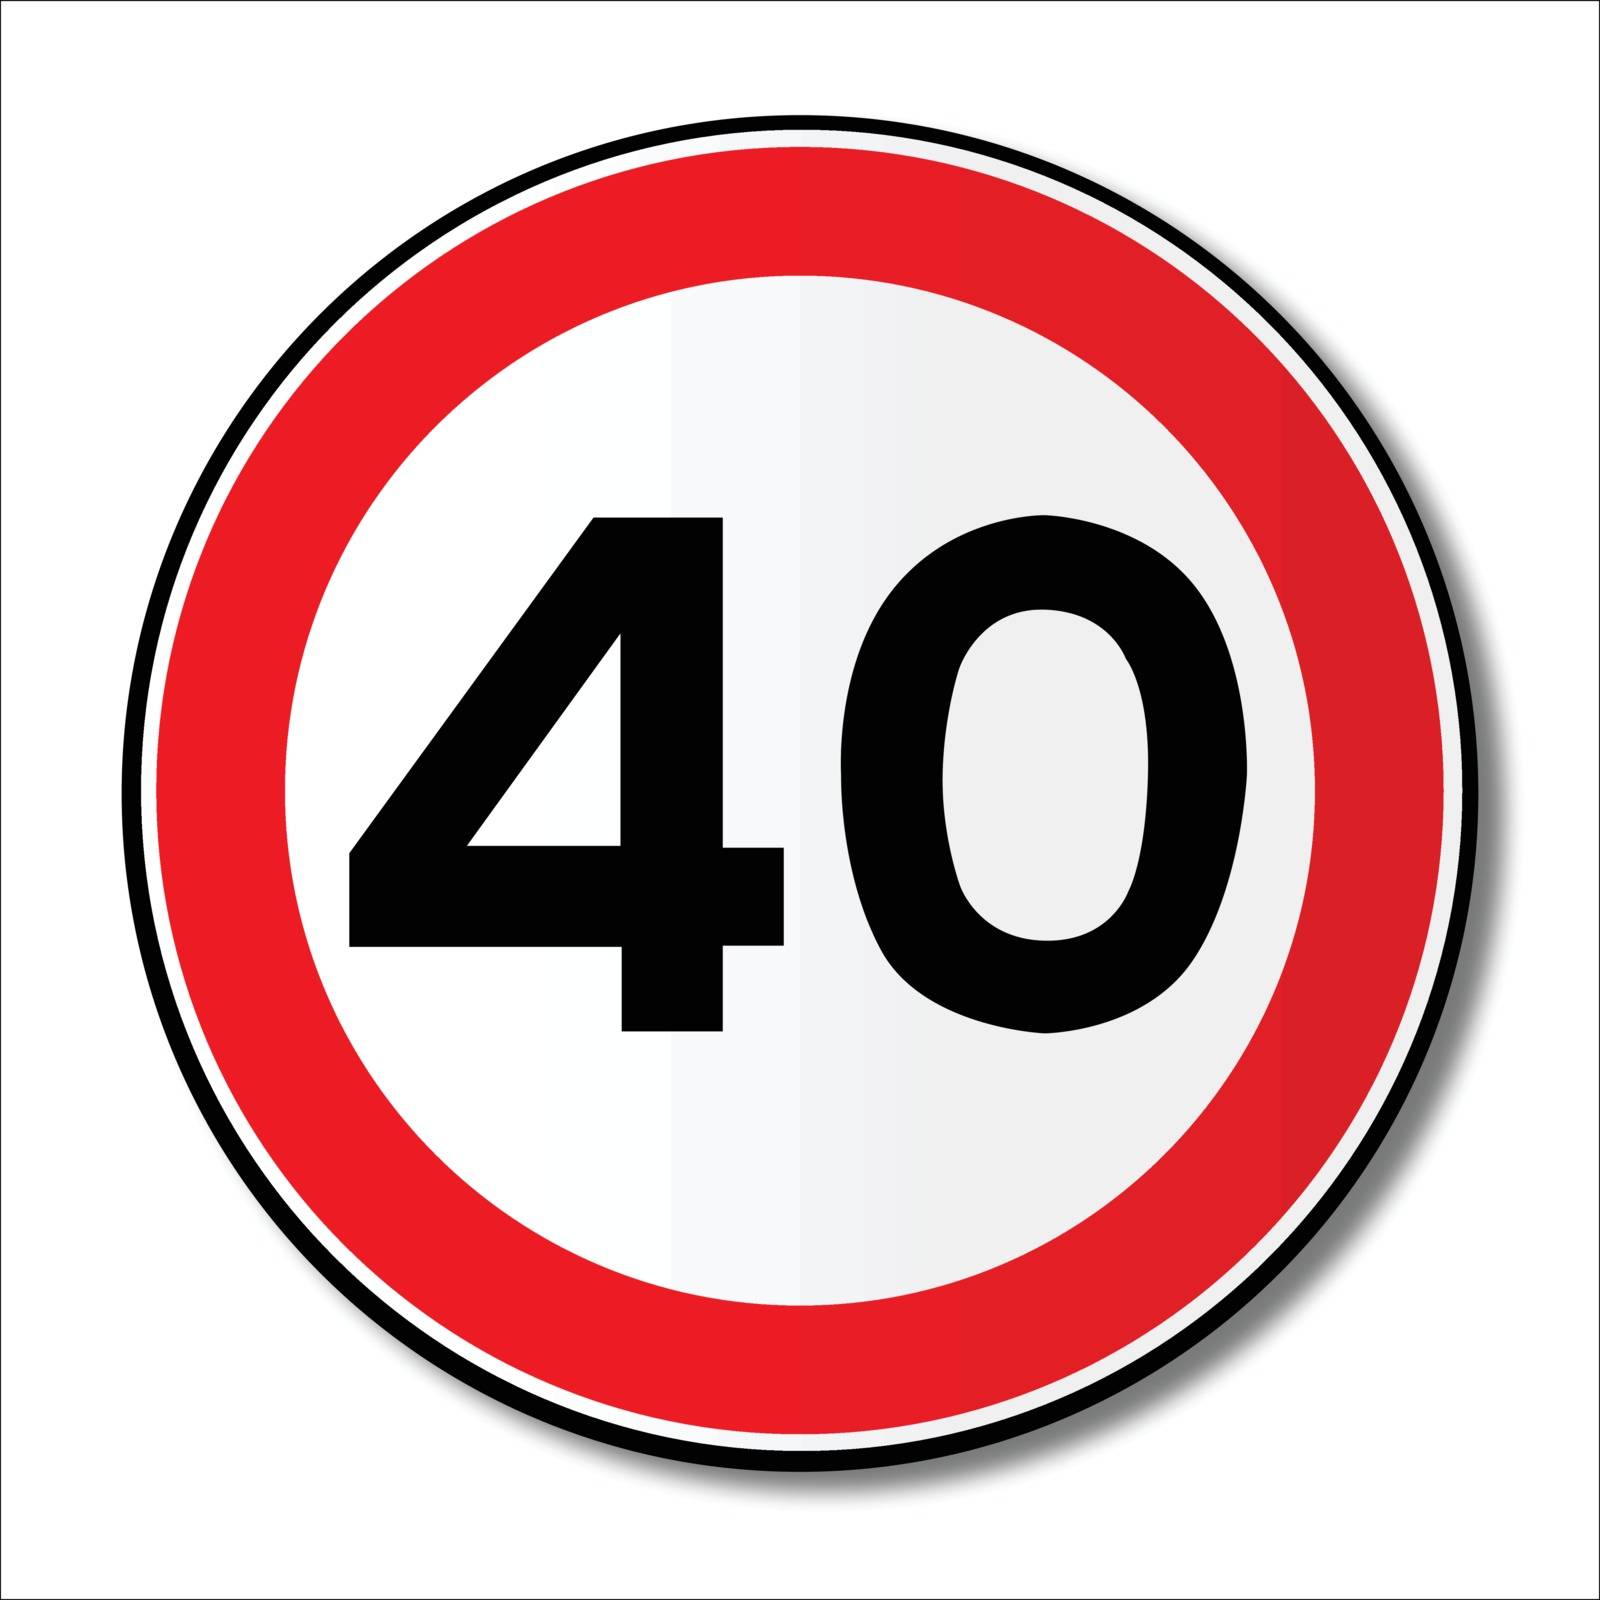 A large round red traffic displaying a forty MPH speed limit